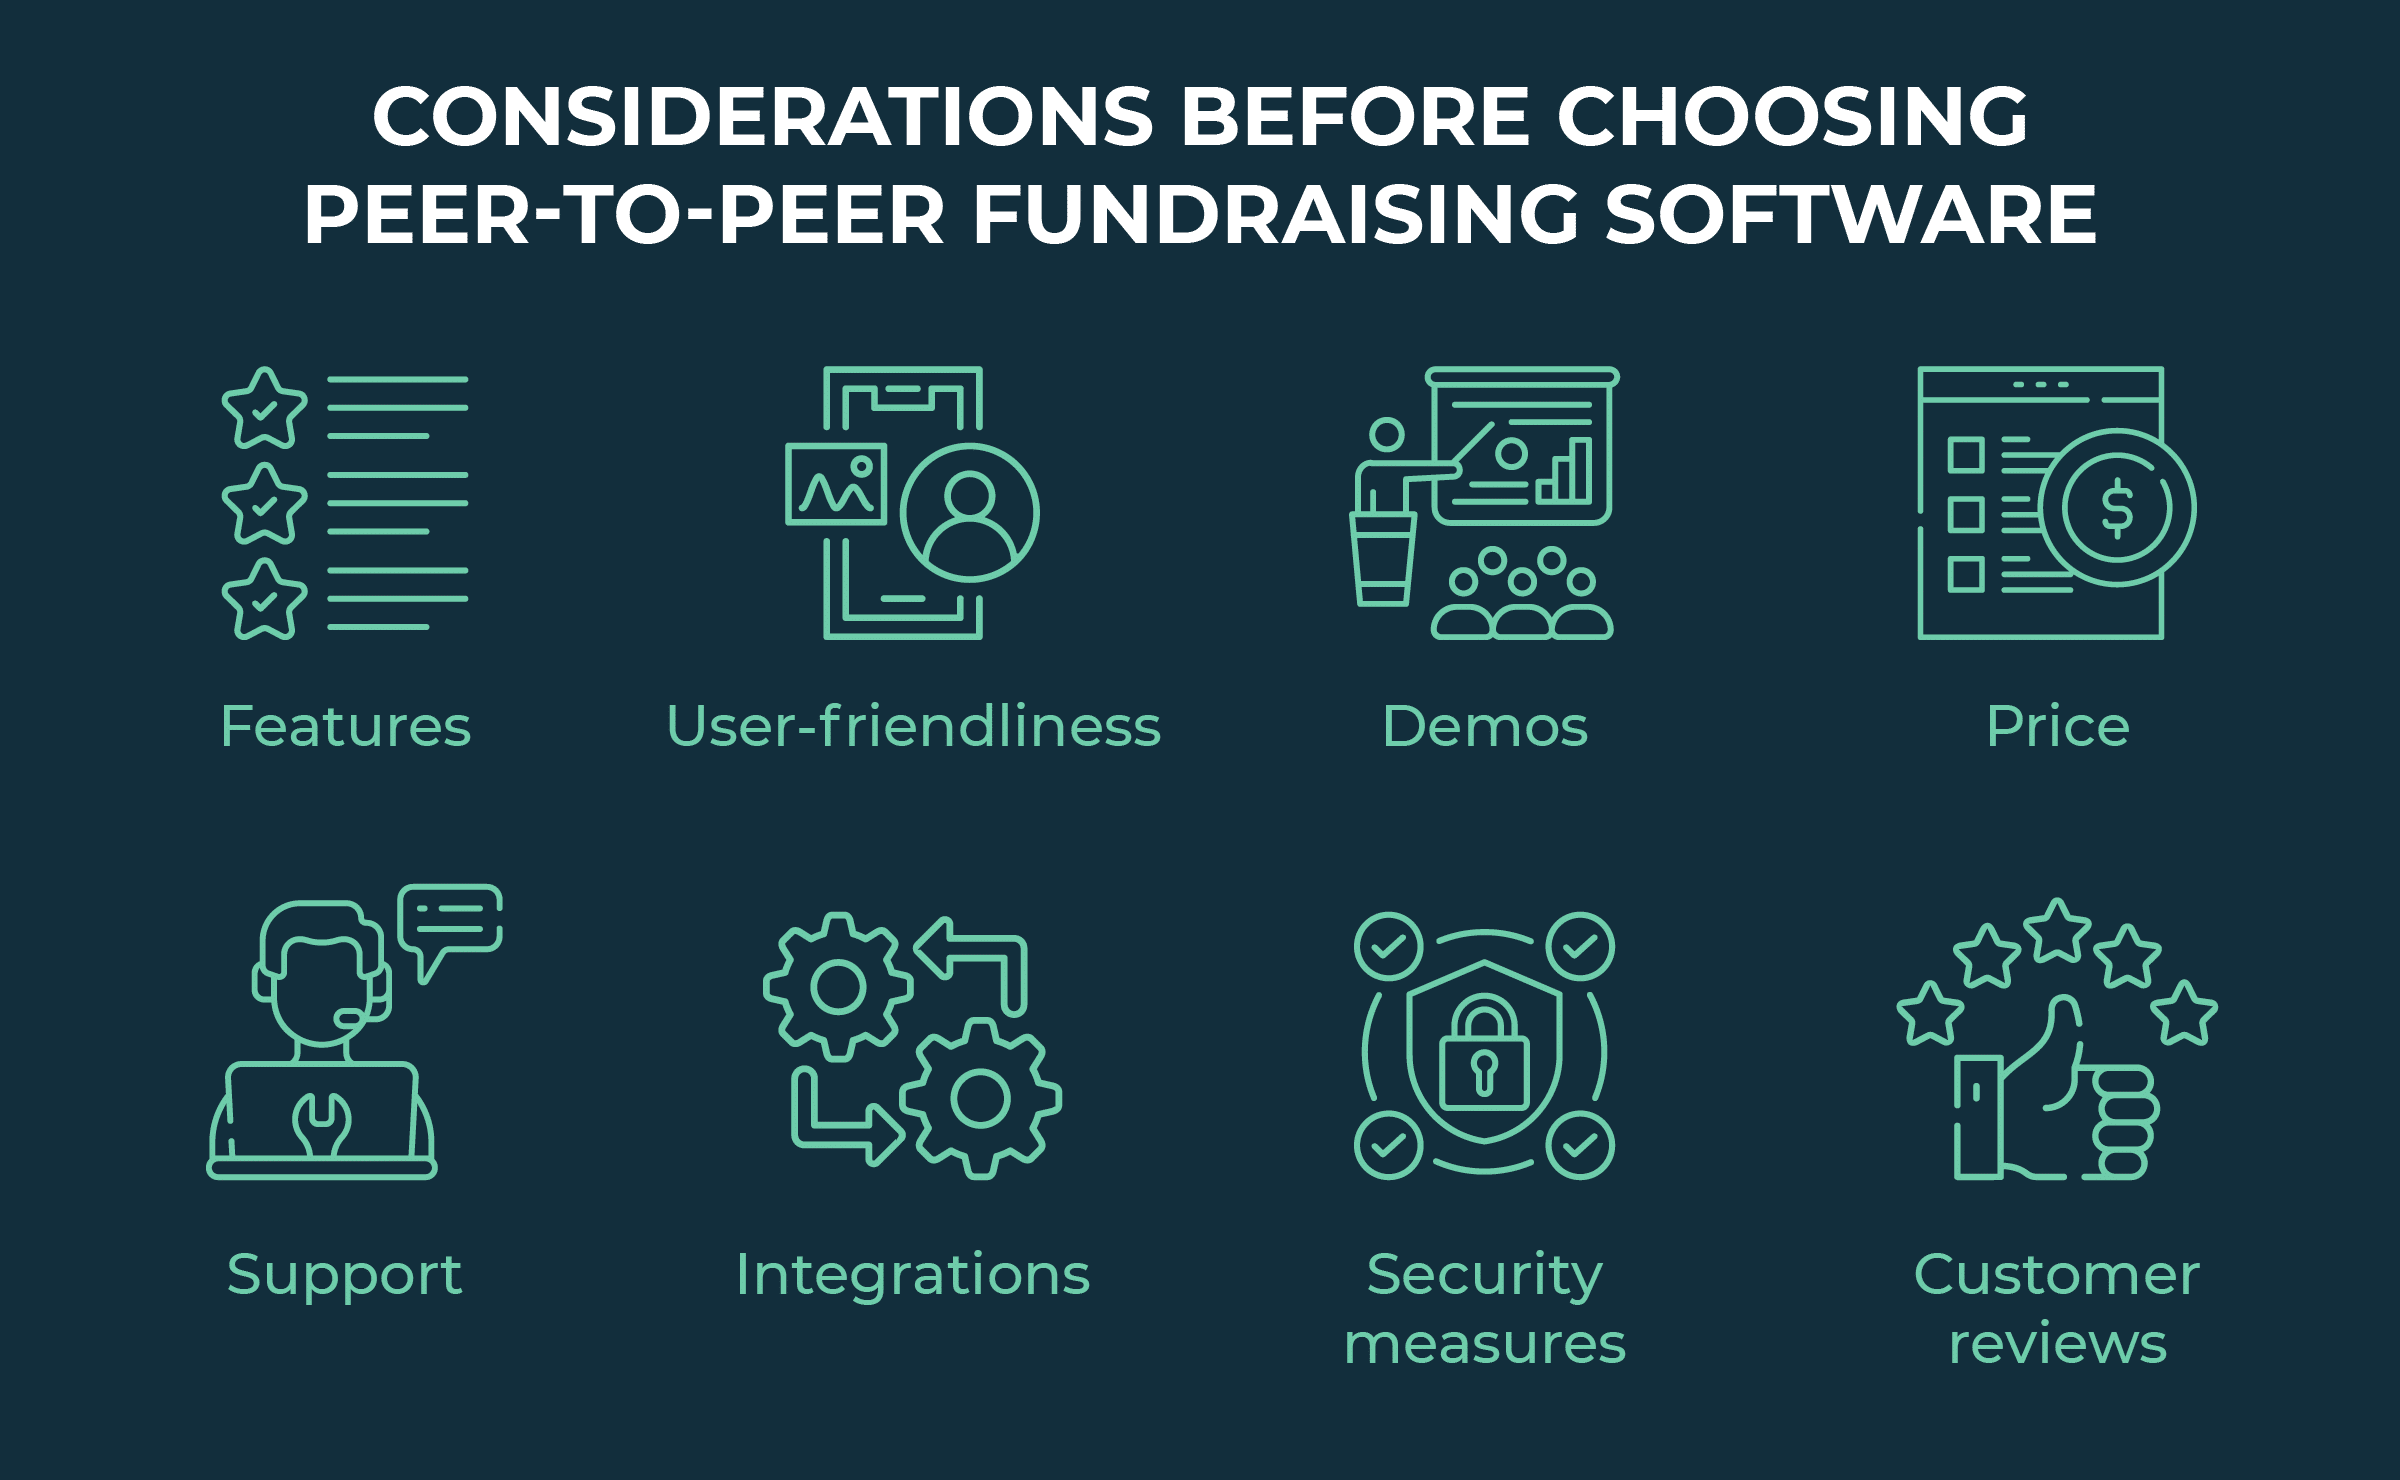 Considerations to make before choosing peer-to-peer fundraising software (explained in the list below) 